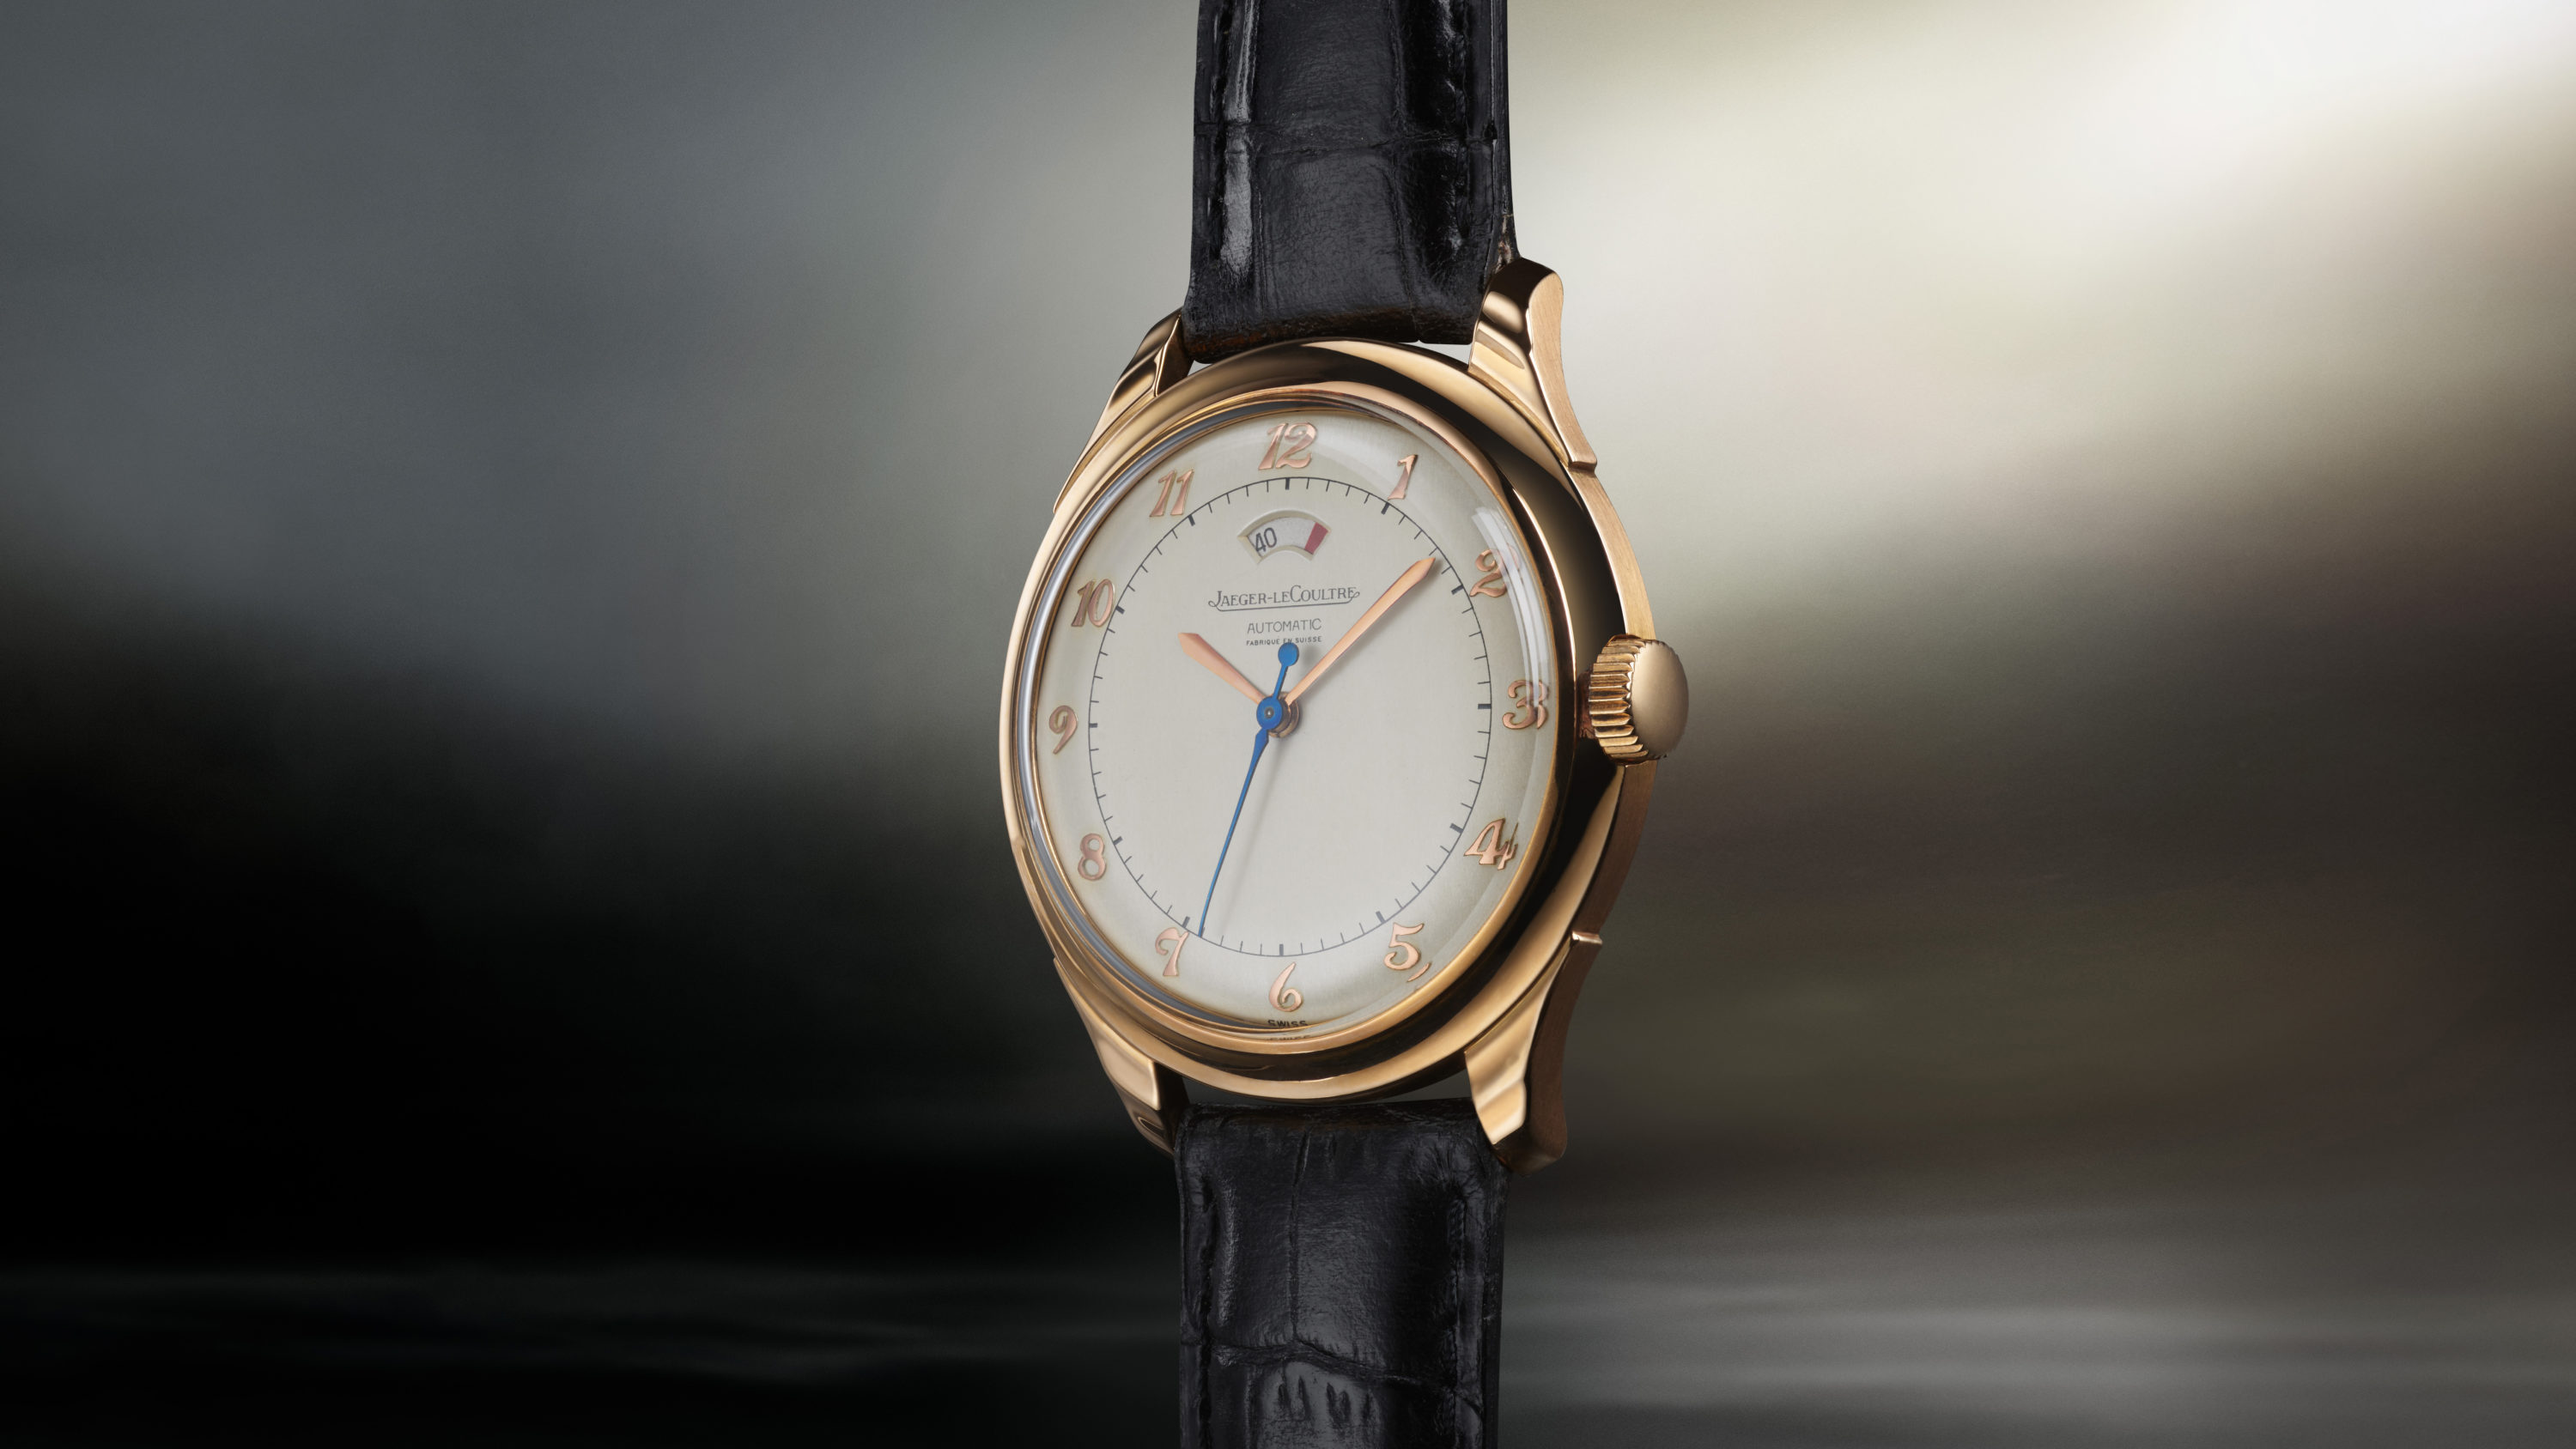 Jaeger-LeCoultre Launches The Collectibles, a Collection of Vintage Timepieces